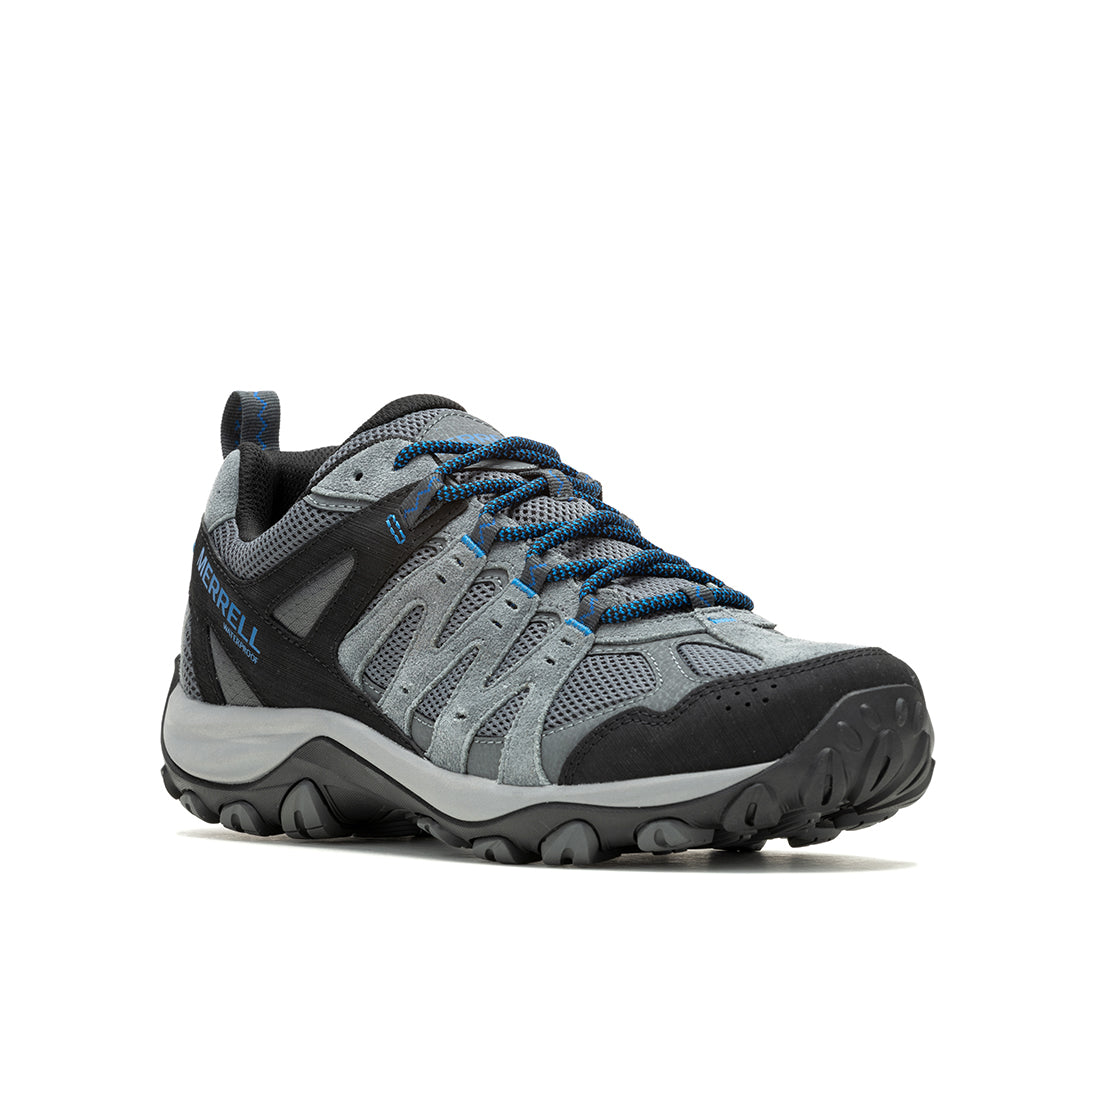 Accentor 3 Waterproof - Rock/Blue Mens Hiking Shoes - 0